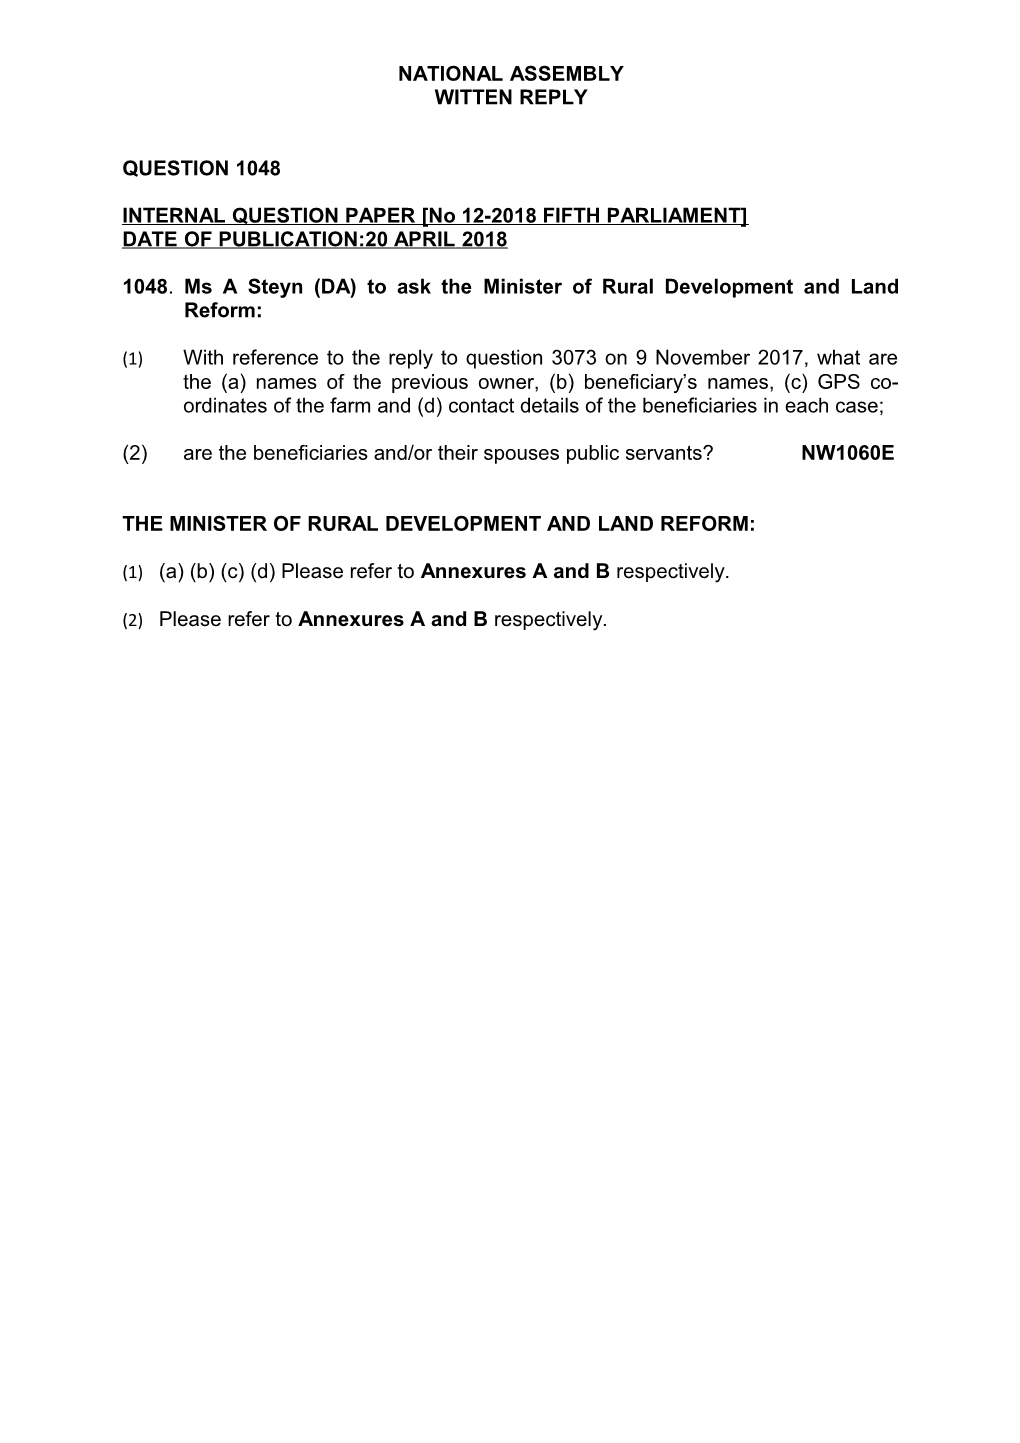 1048.Ms a Steyn (DA) to Ask the Minister of Rural Development and Land Reform